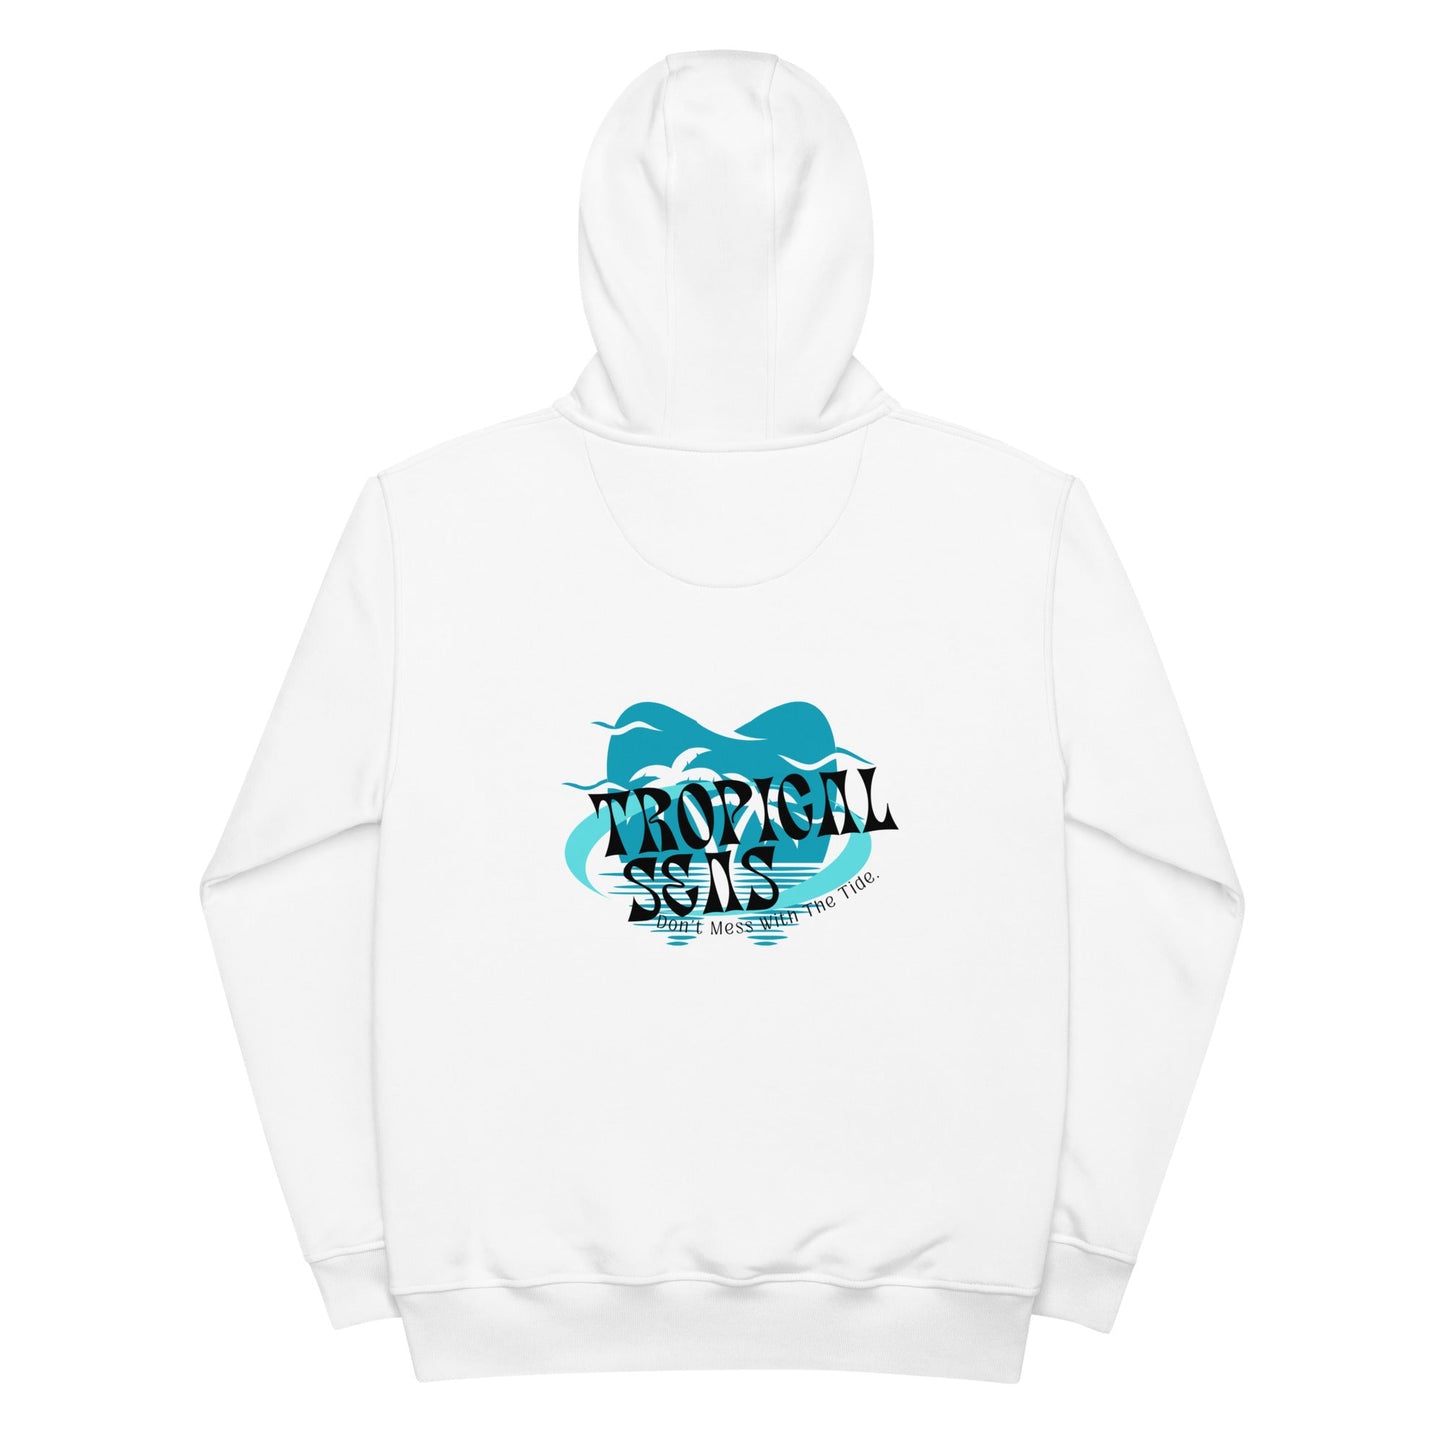 Men’s Don’t mess with the tide hoodies: Wild Tides: Eco-Adventure Sweatshirt - Tropical Seas Clothing 